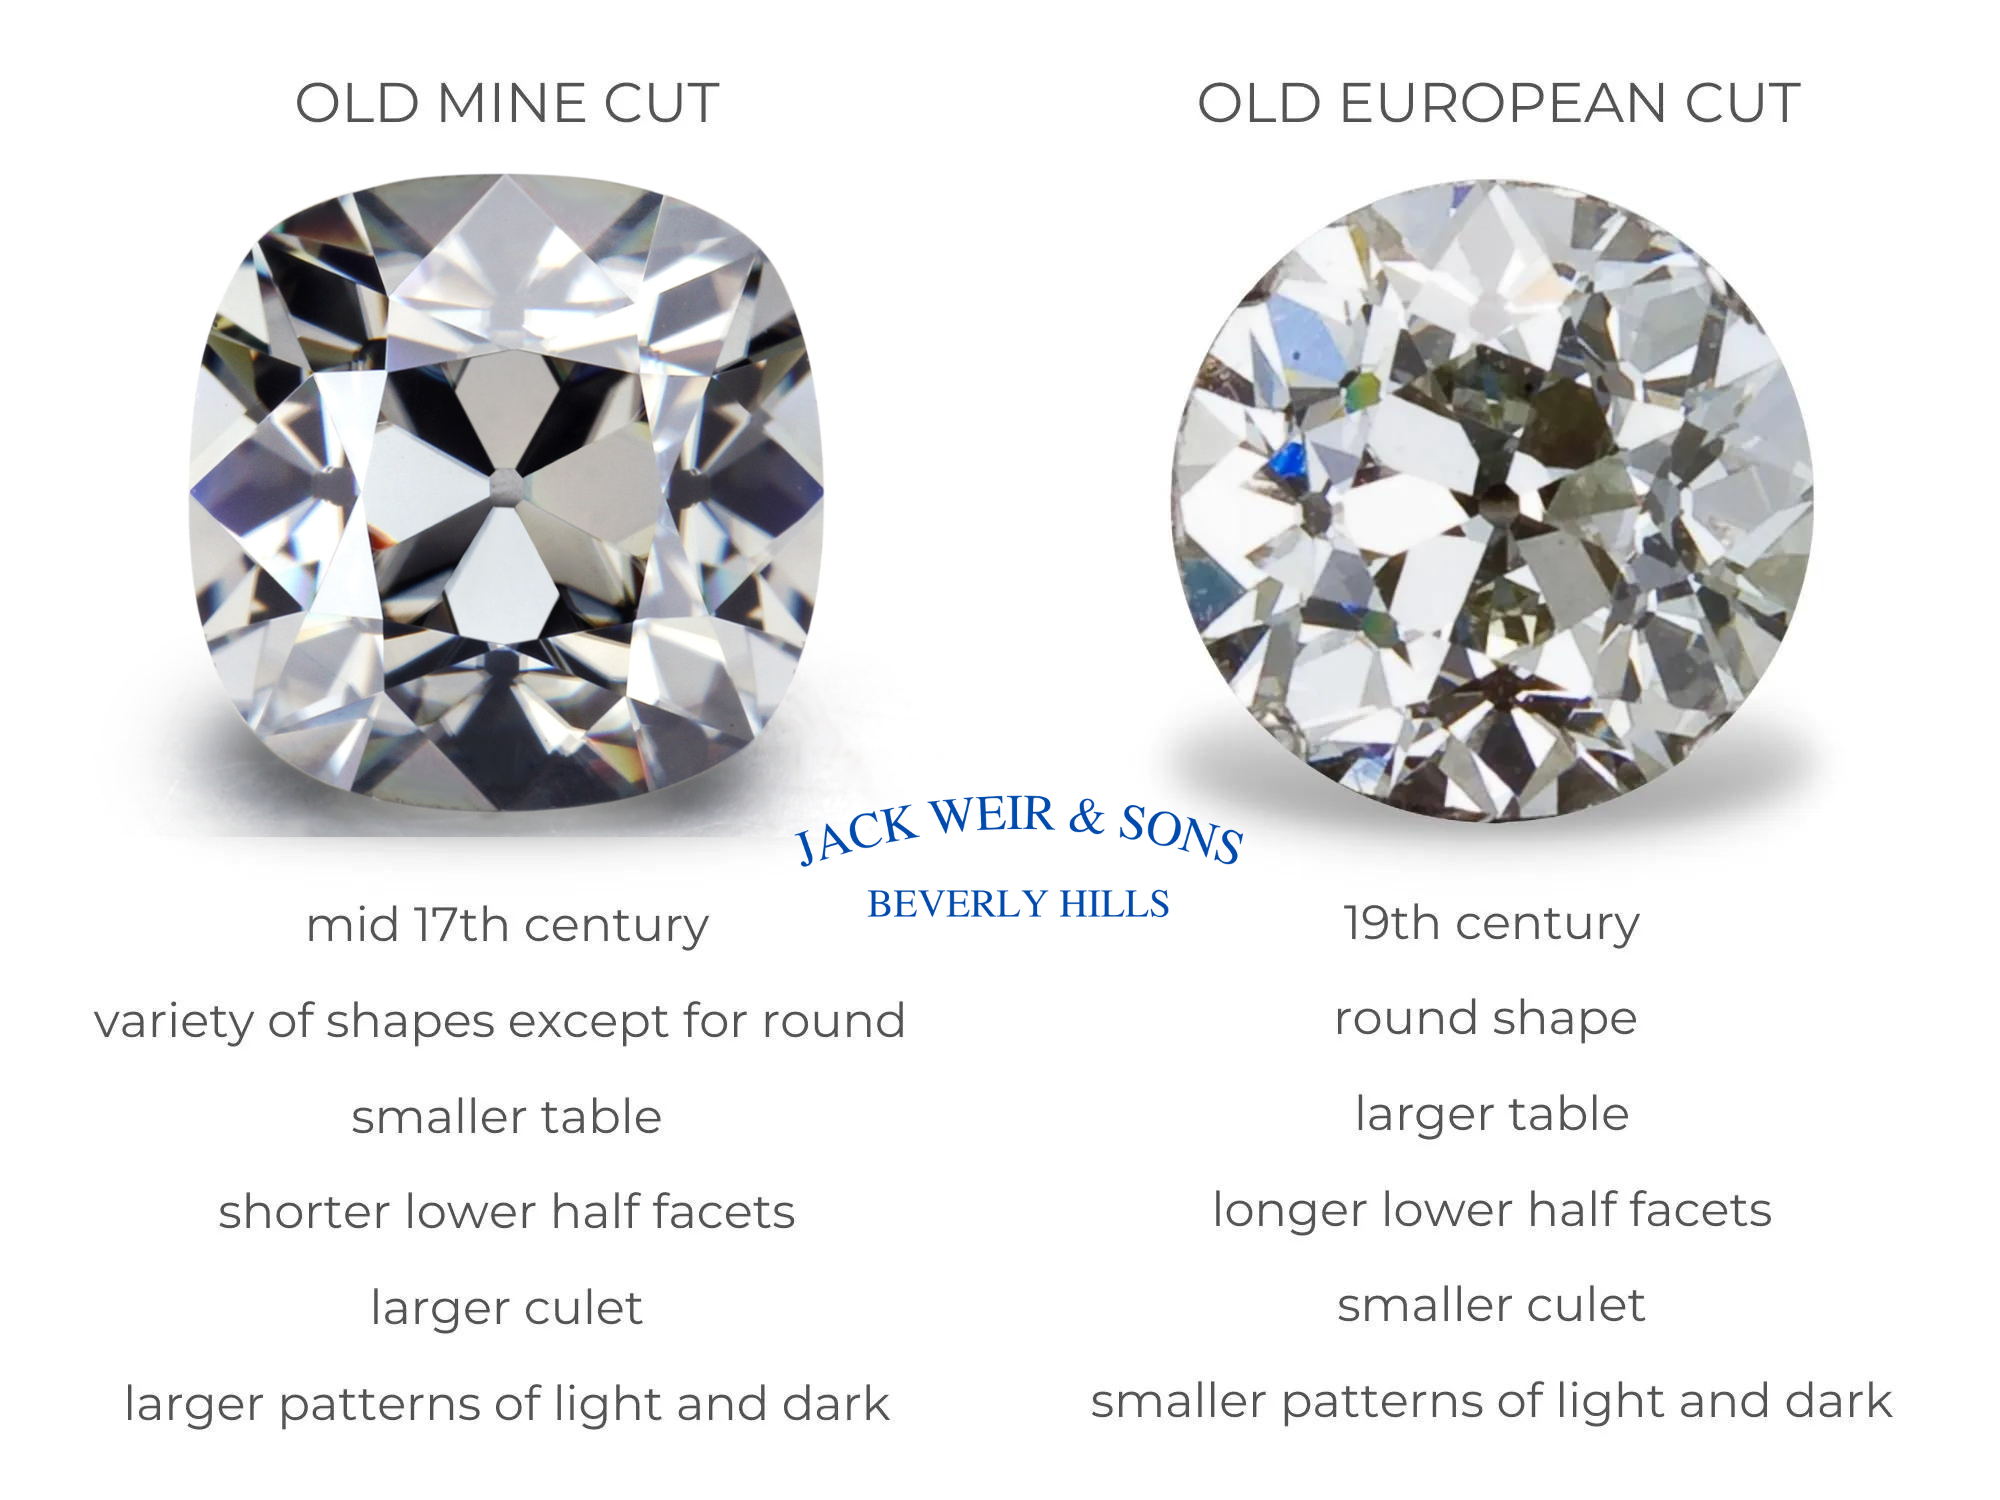 Side by Side close up of Old Mine Cut Diamond and Old European Cut Diamond comparing the two cuts. The Old Mine Cut Diamond originated in mid 17th century with a variety of shapes aside from round, has a smaller table, shorter lower half facets, a larger culet and larger patterns of light amd dark. The Old European Cut originated in the 19th century, is the precursor for the brilliant round that we know today, has a larger table, longer lower half facets, a smaller culet and smaller patterns of light and dark.